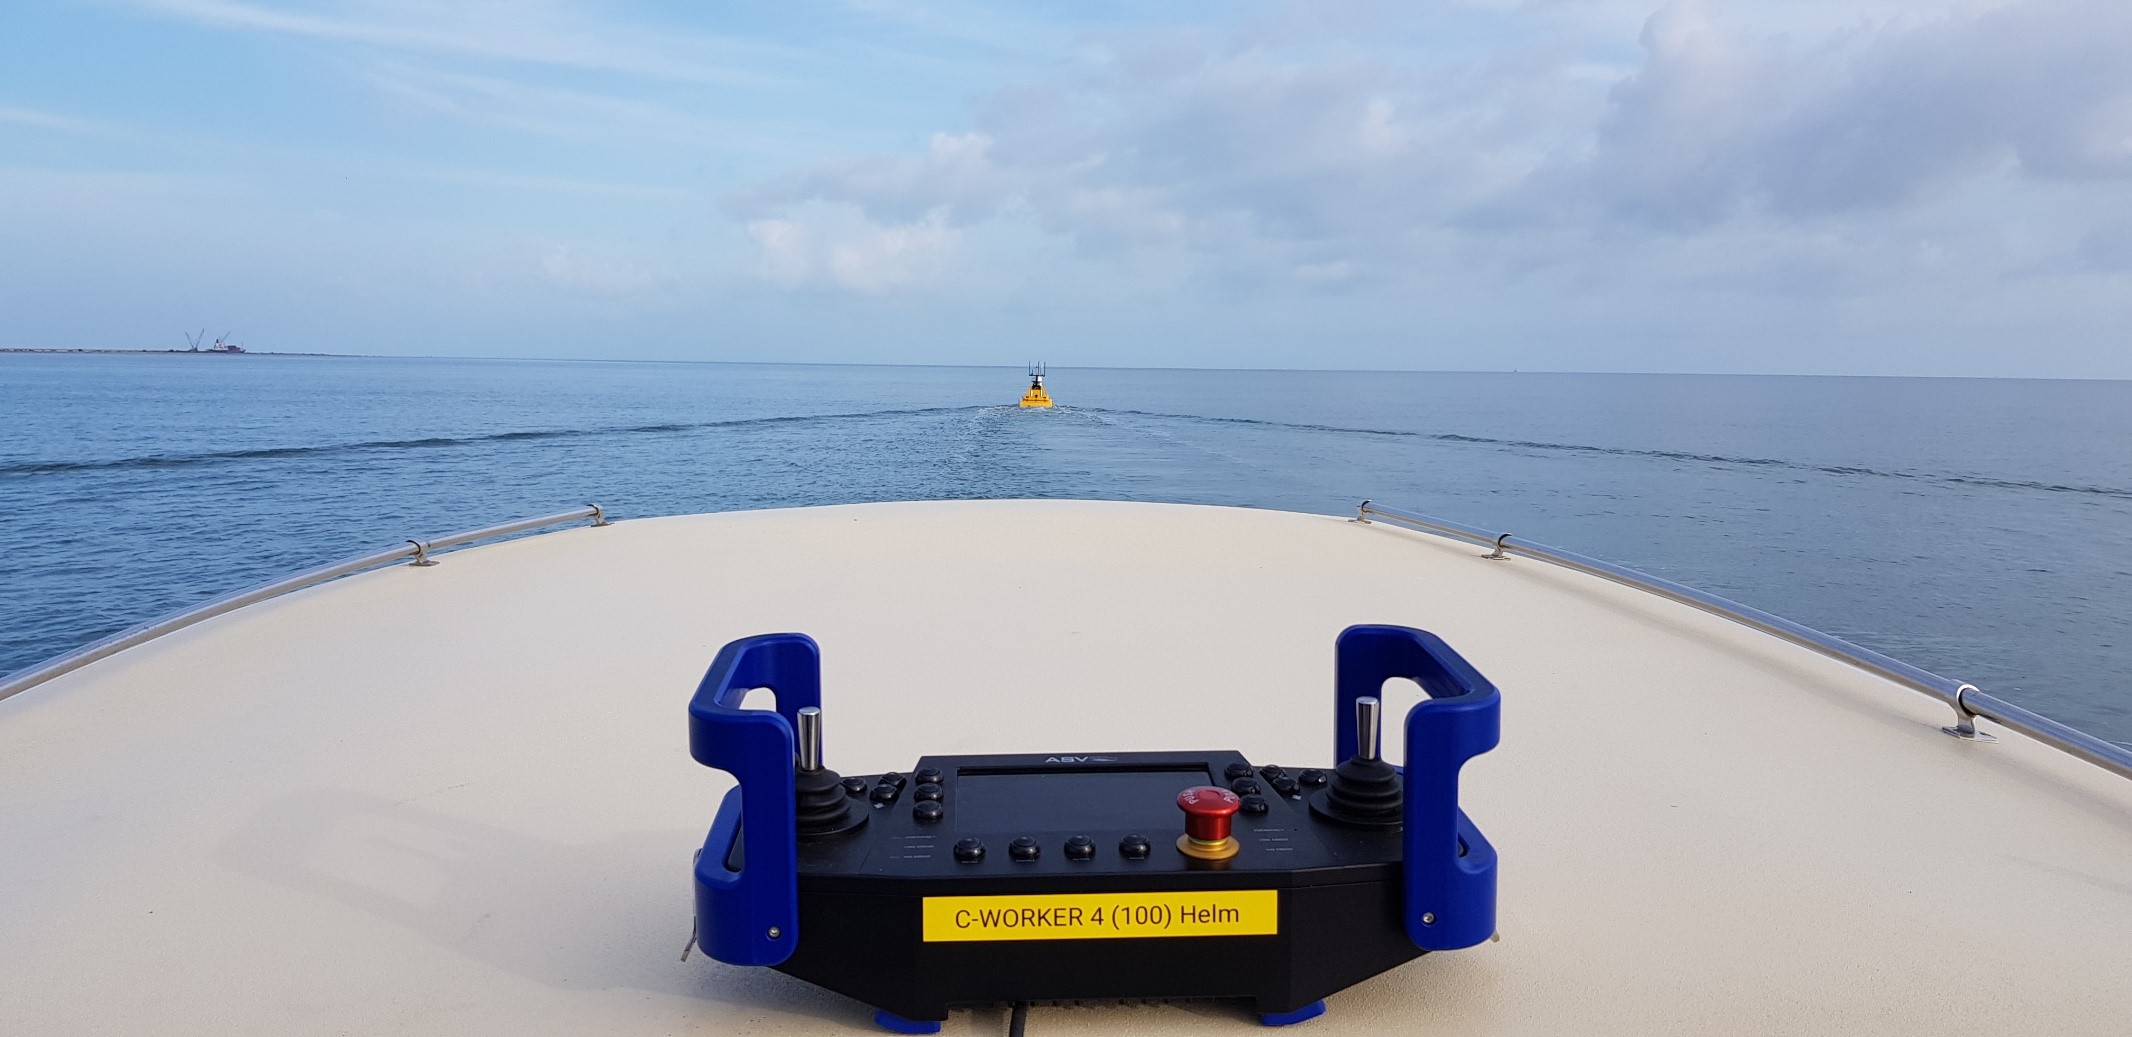 C-worker 4 starting a day’s surveying from Belize Marina in 2019